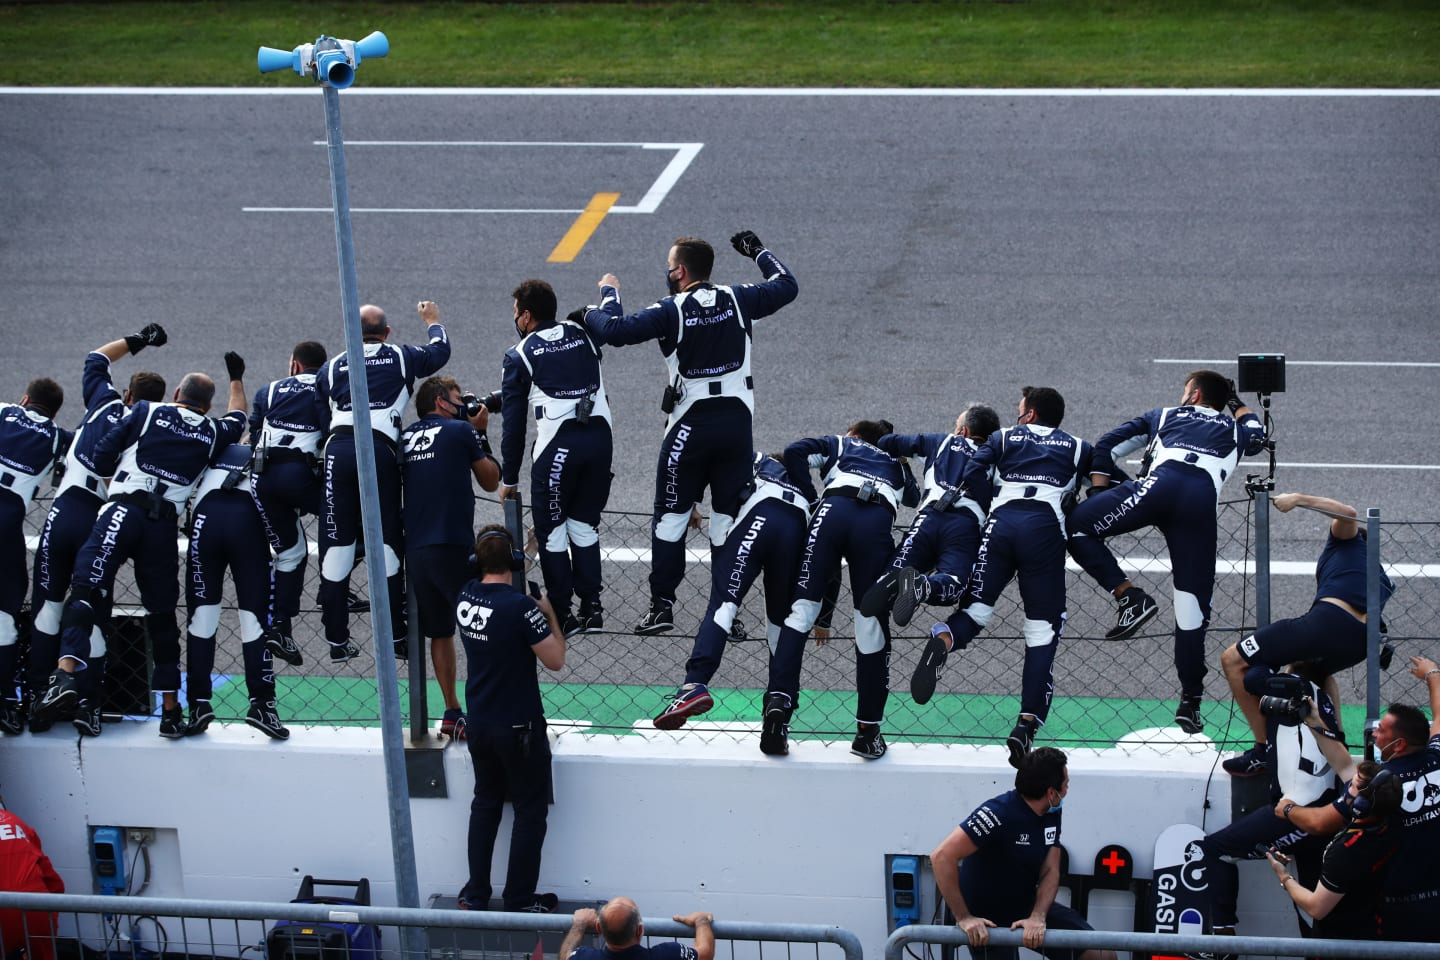 MONZA, ITALY - SEPTEMBER 06: Scuderia AlphaTauri team members celebrate during the F1 Grand Prix of Italy at Autodromo di Monza on September 06, 2020 in Monza, Italy. (Photo by Mark Thompson/Getty Images)